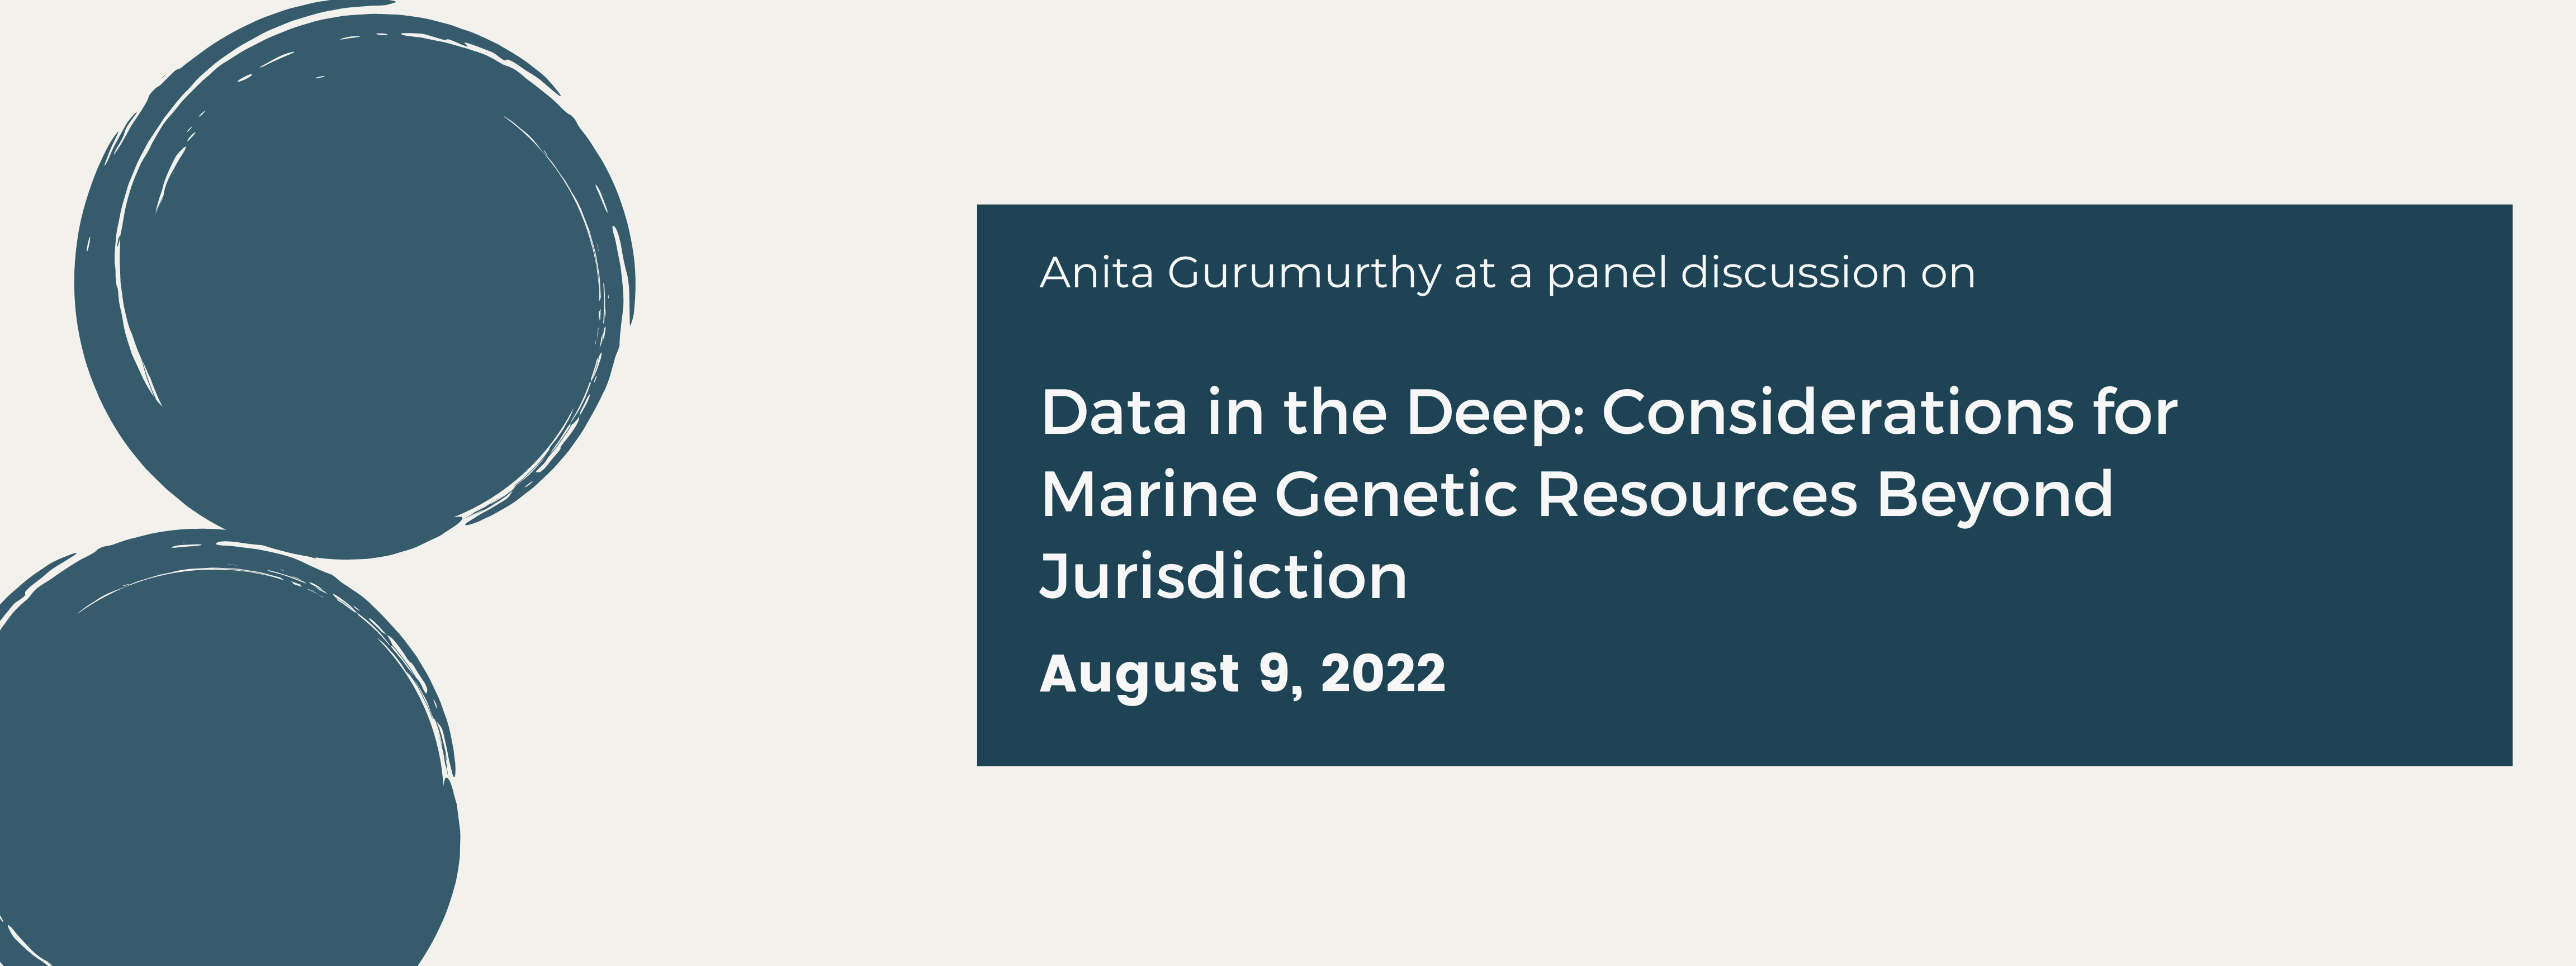 Data in the Deep: Considerations for Marine Genetic Resources Beyond Jurisdiction